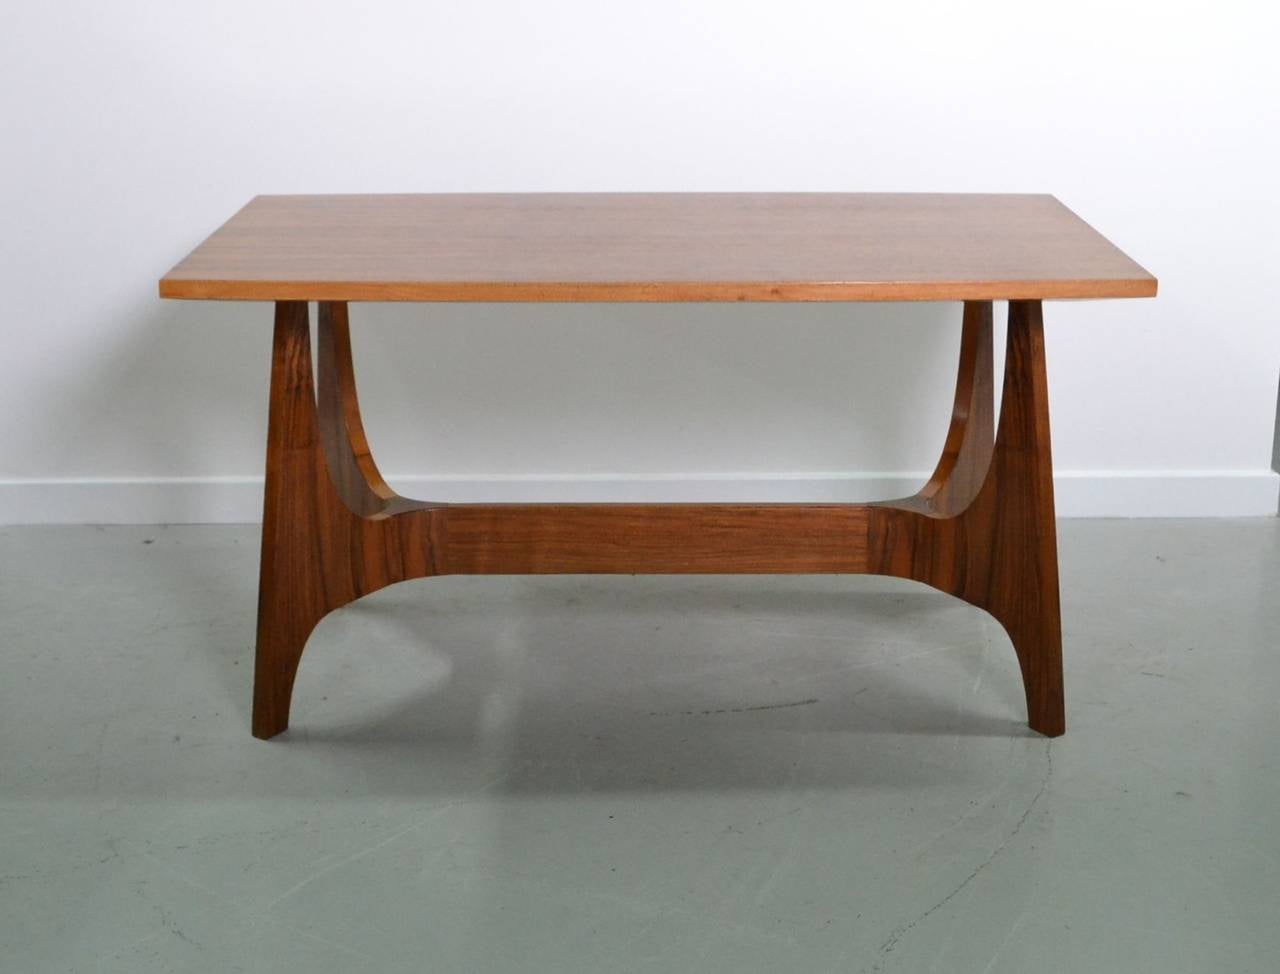 Walnut desk or table with organic form base.